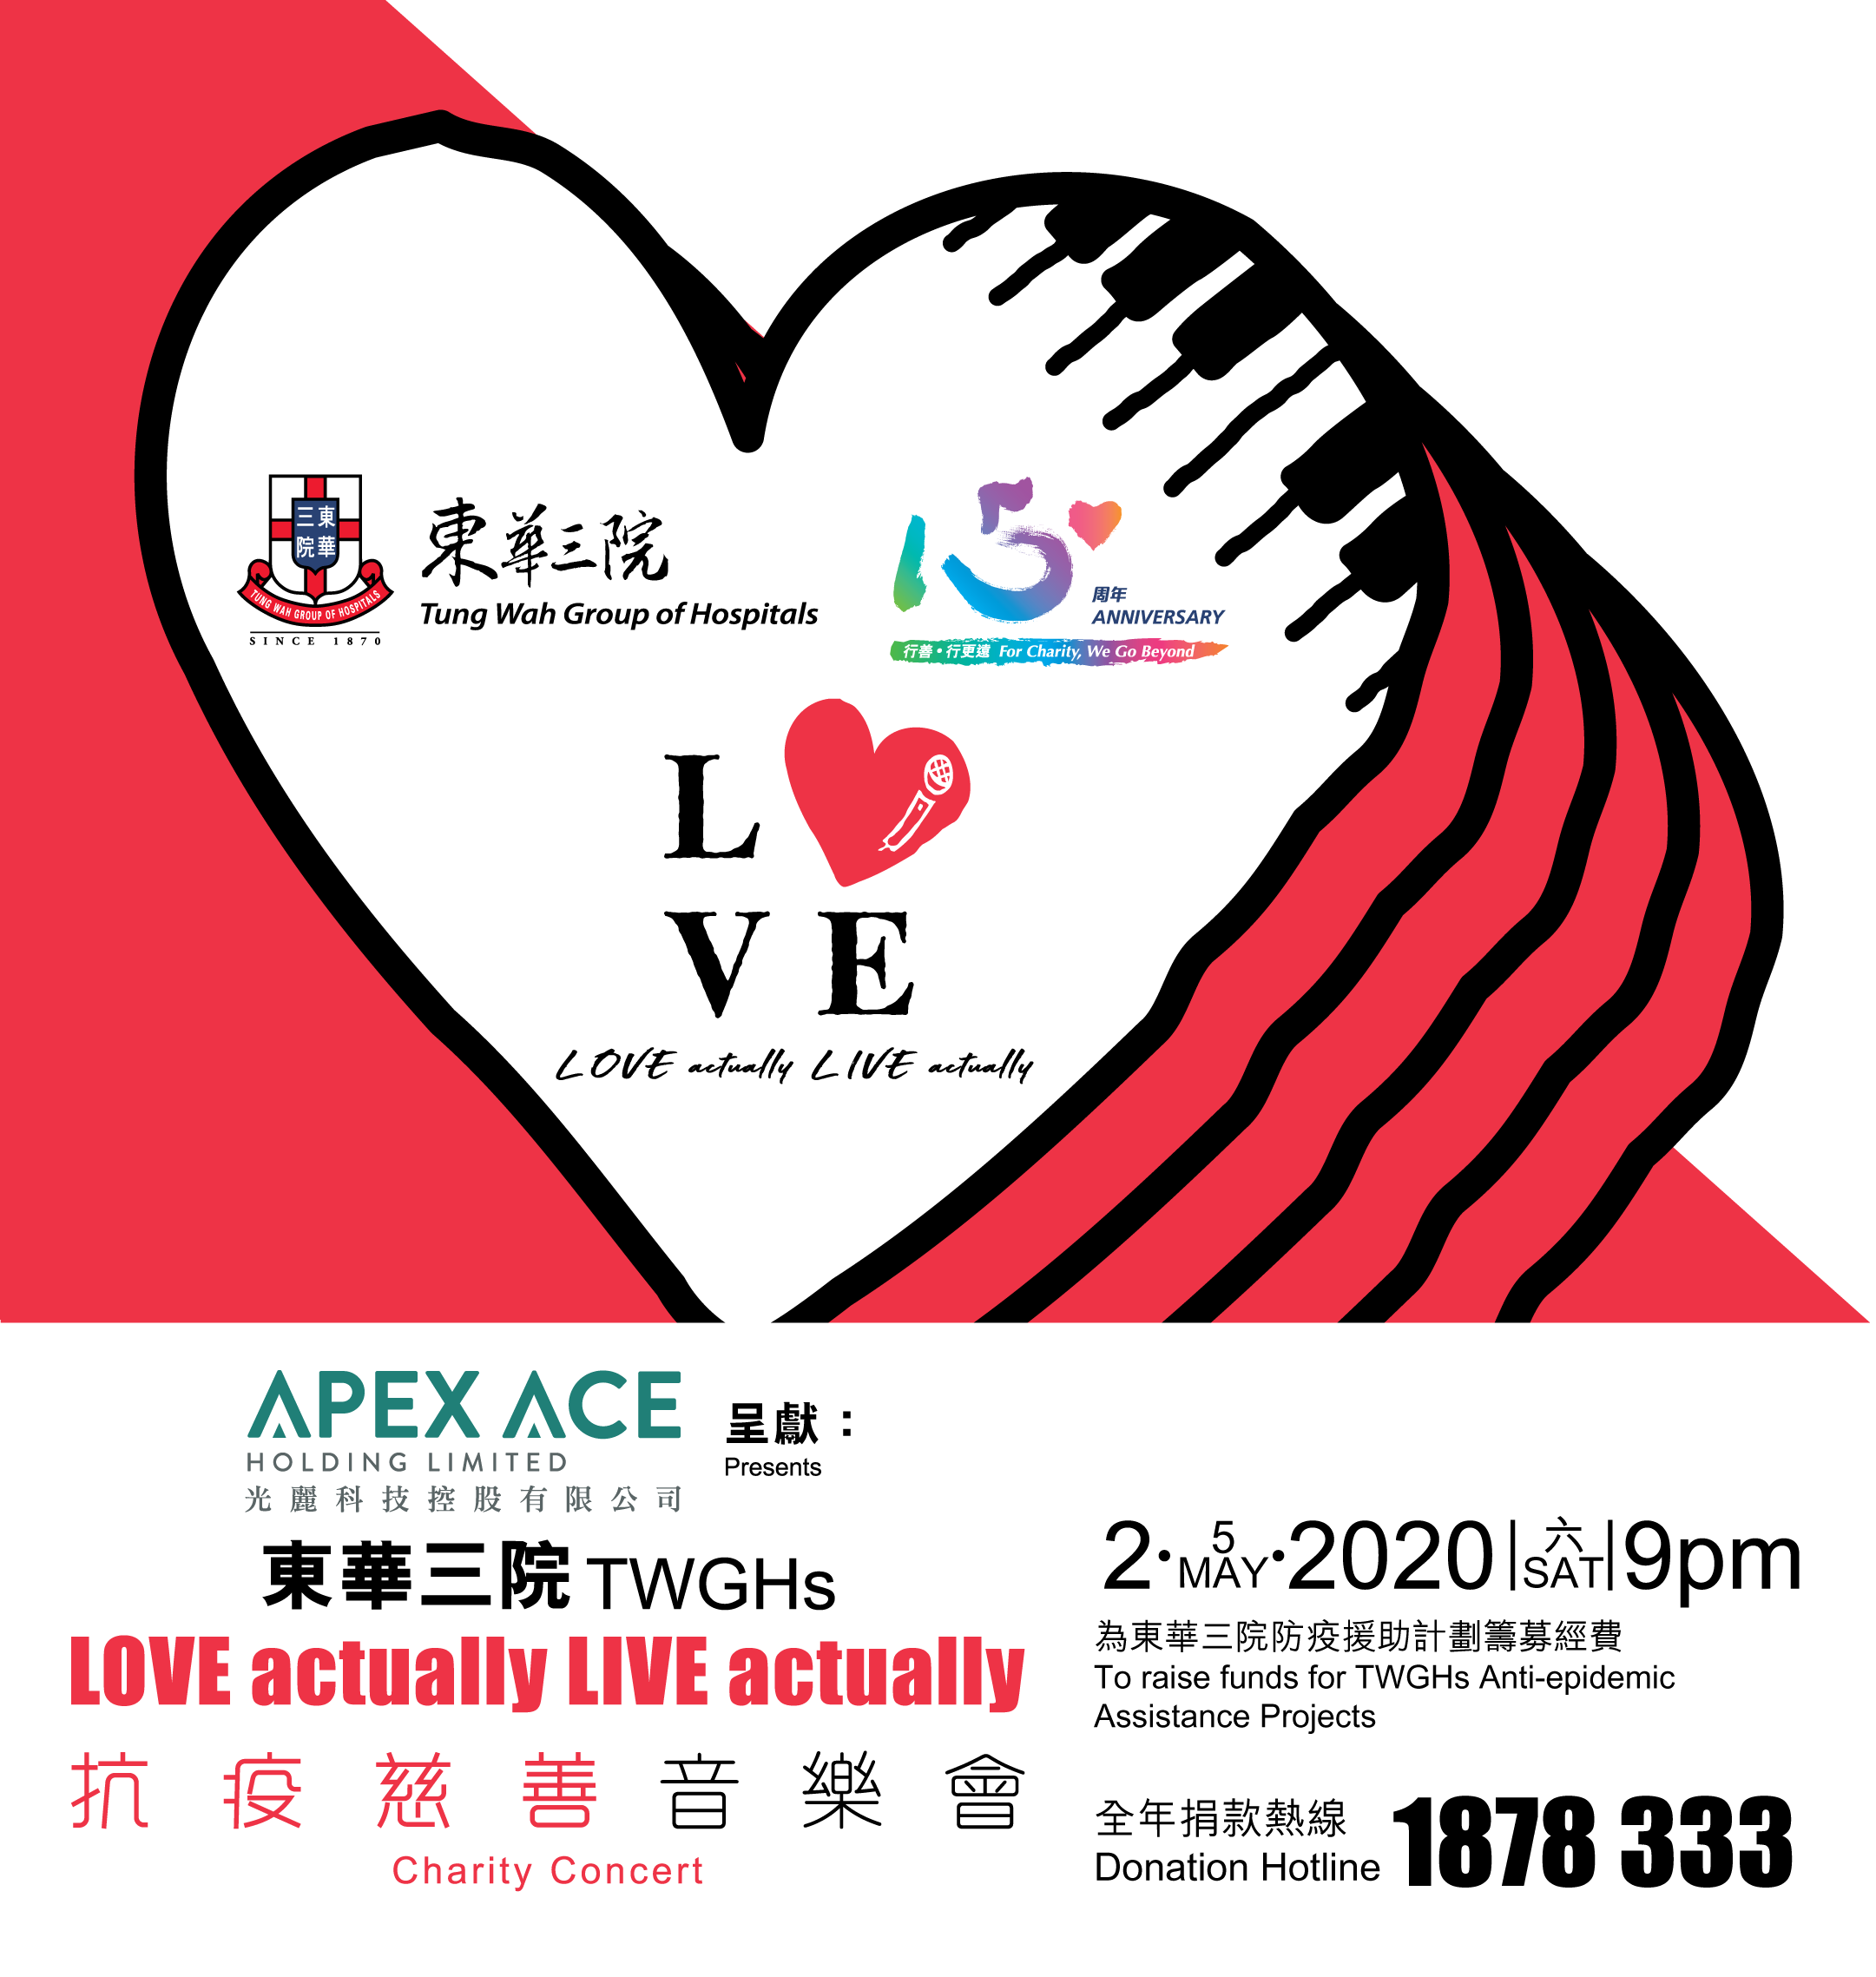 Apex Ace Holding Ltd. presents: TWGHs Charity Concert “LOVE actually LIVE actually”